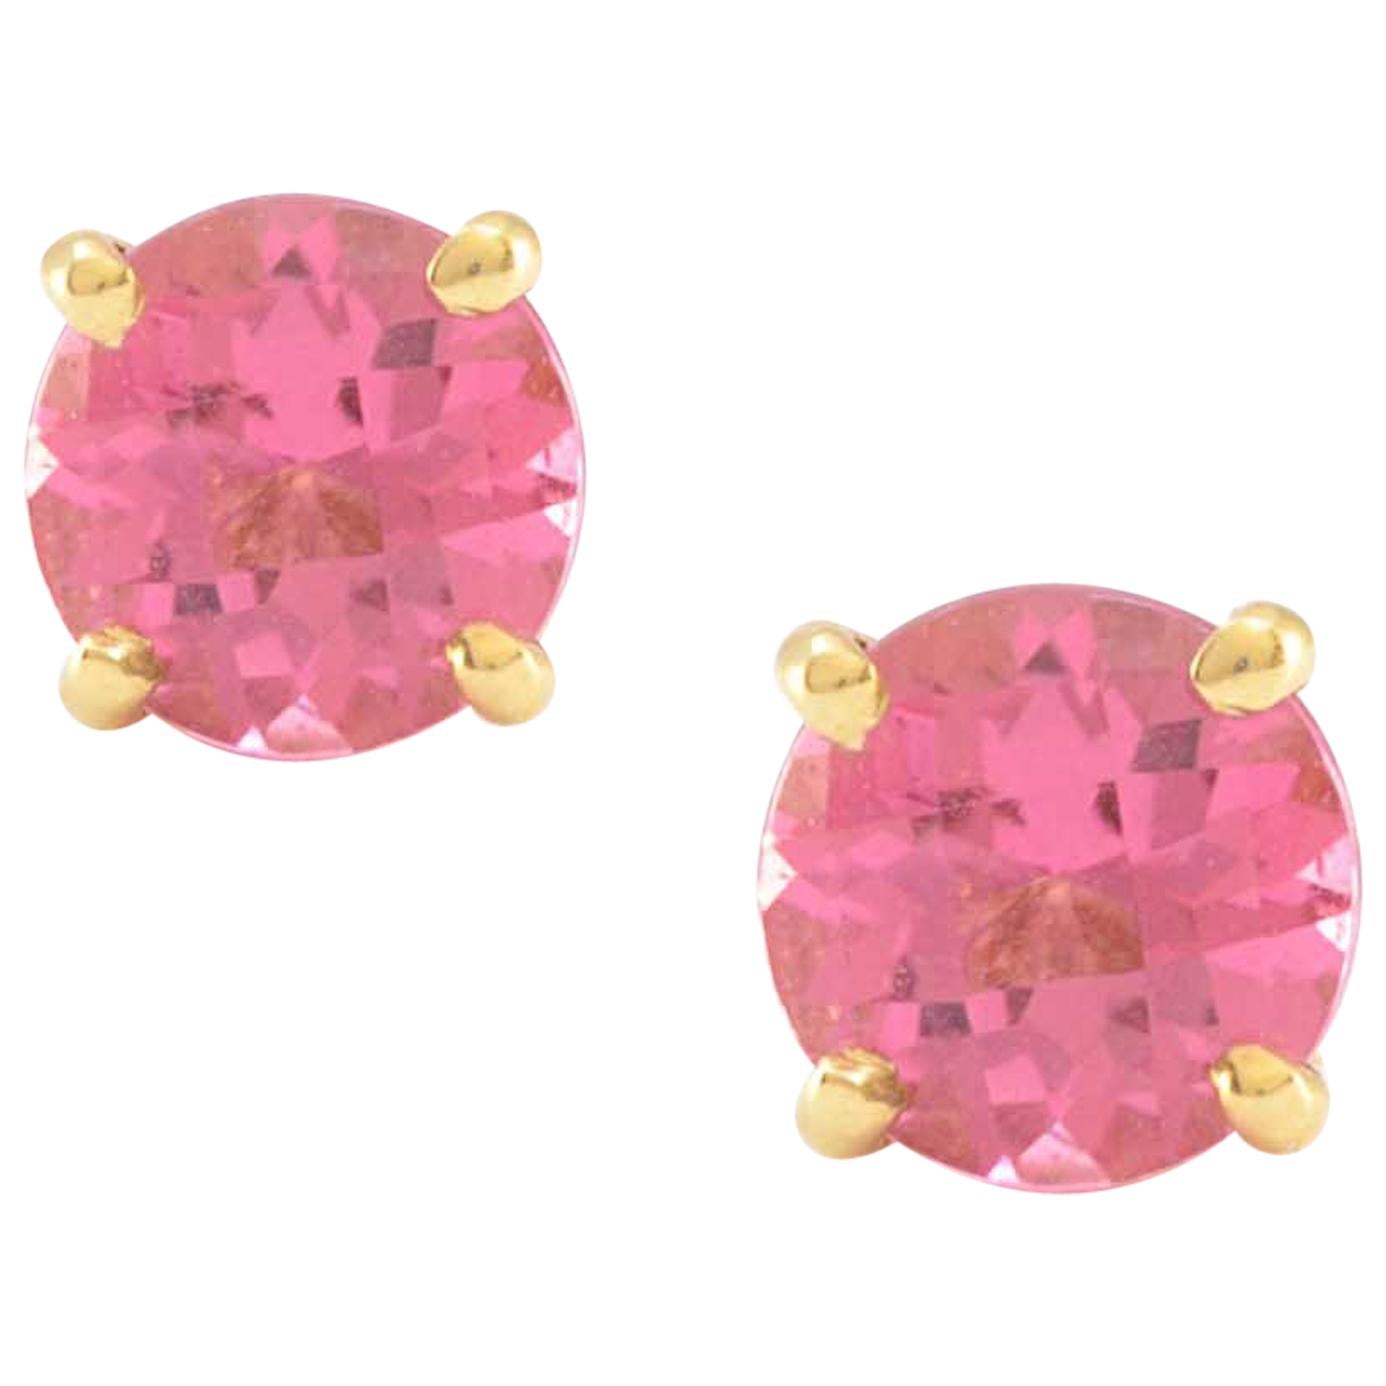 Solid 14 Karat Yellow Gold Pink Tourmaline Stud Earrings, Excellent Condition